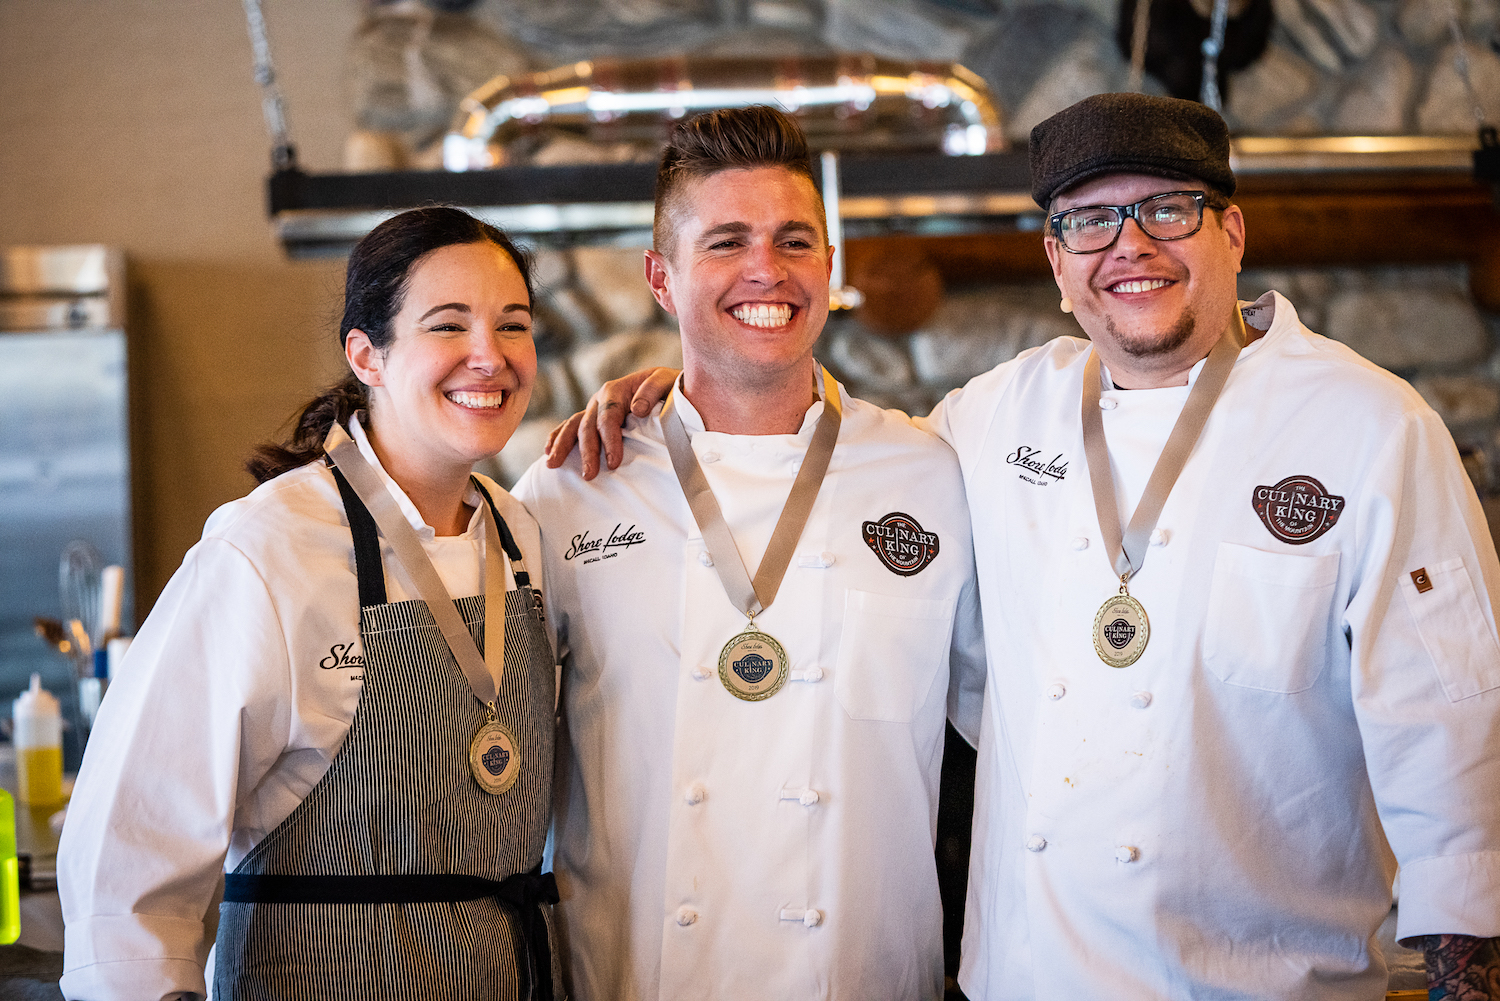 Amateur home cooks vie for the crown at  Shore Lodge’s Culinary King of the Mountain competition.